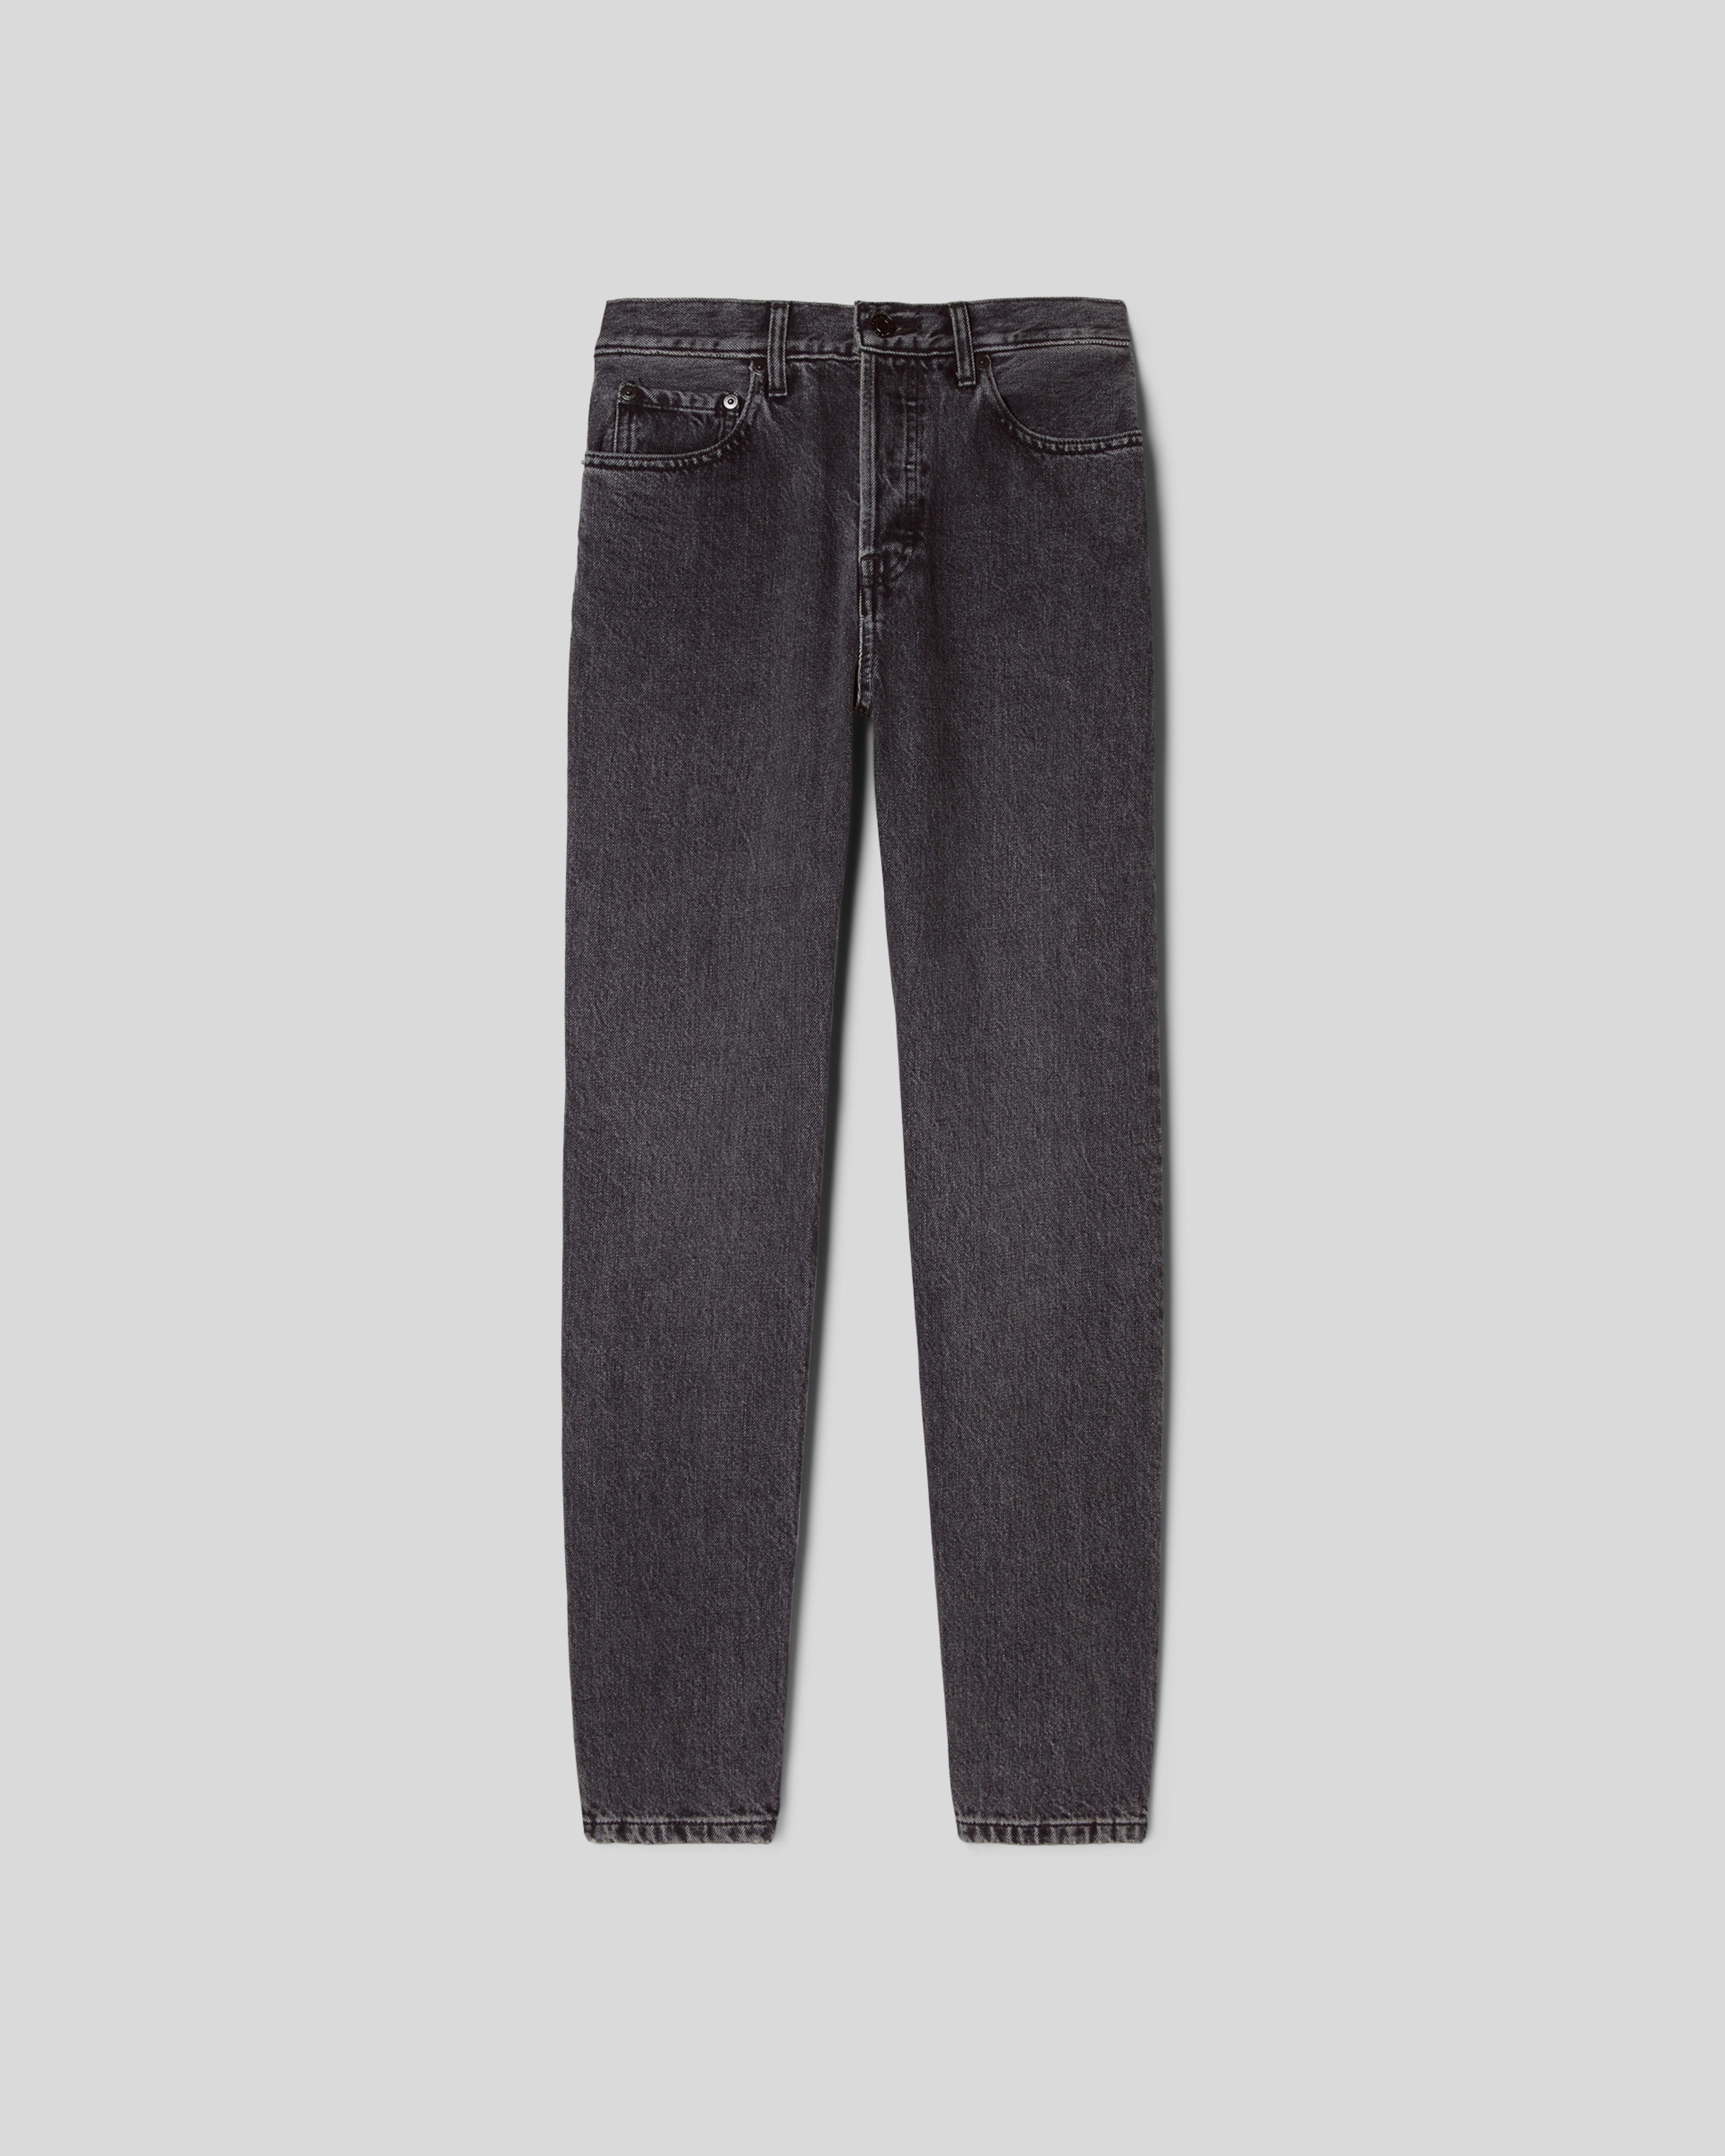 The ’90s Cheeky® Jean Washed Black – Everlane